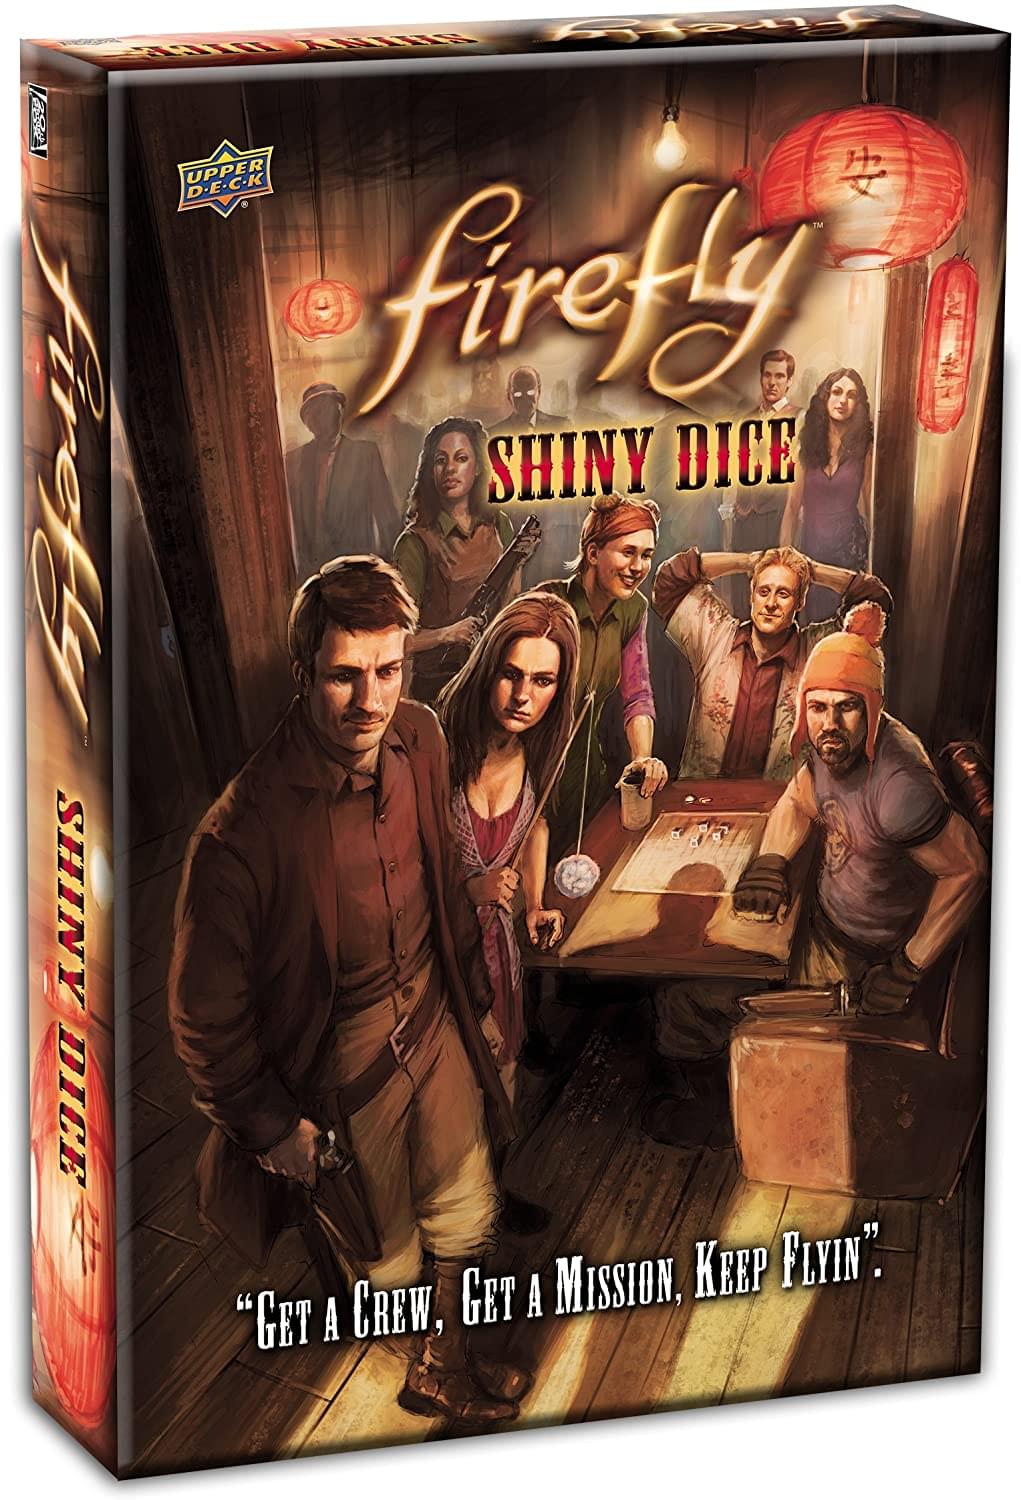 Firefly Shiny Dice Game